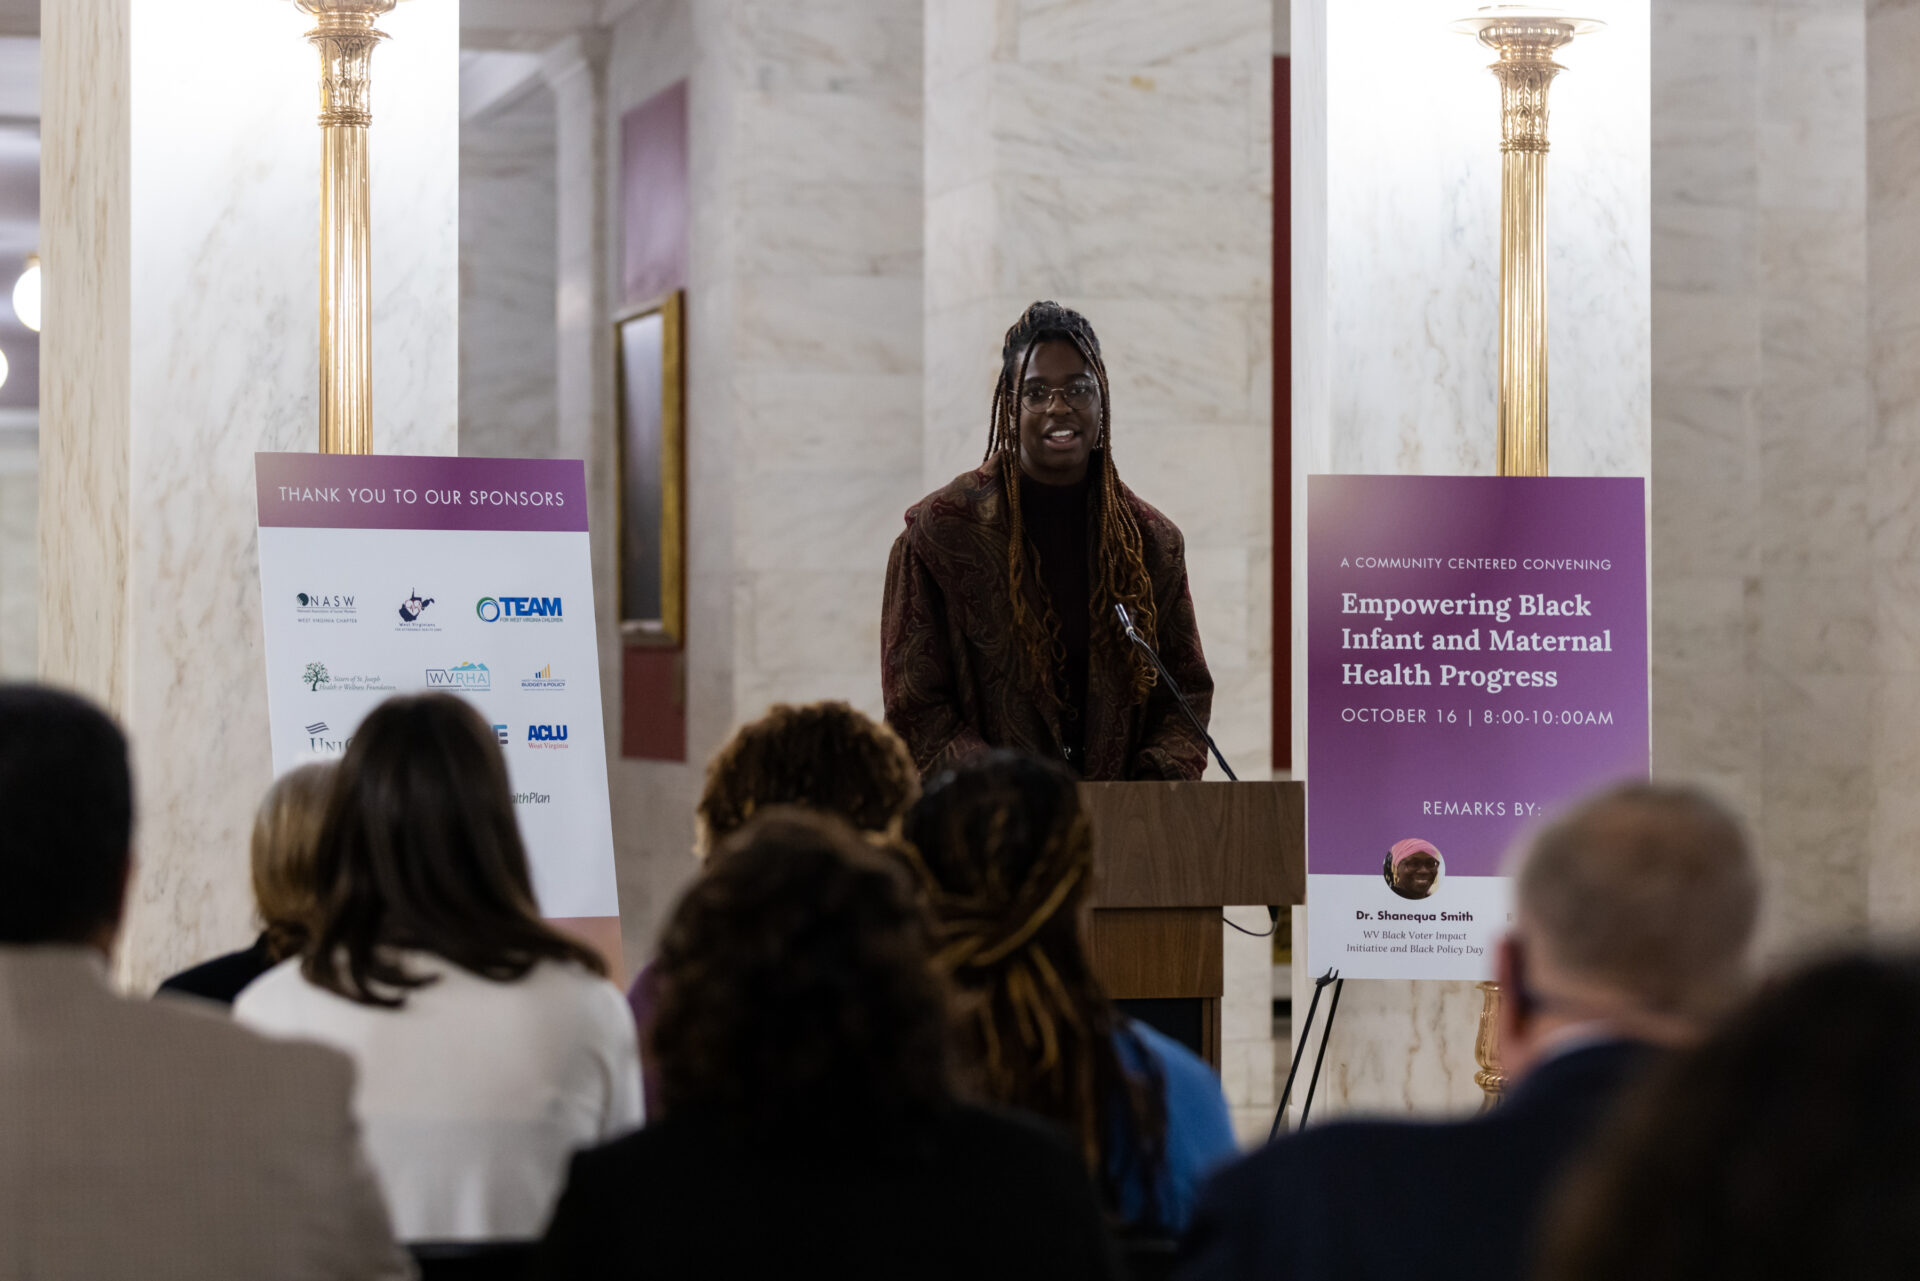 Advocates Discuss Black Infant And Maternal Health With Lawmakers